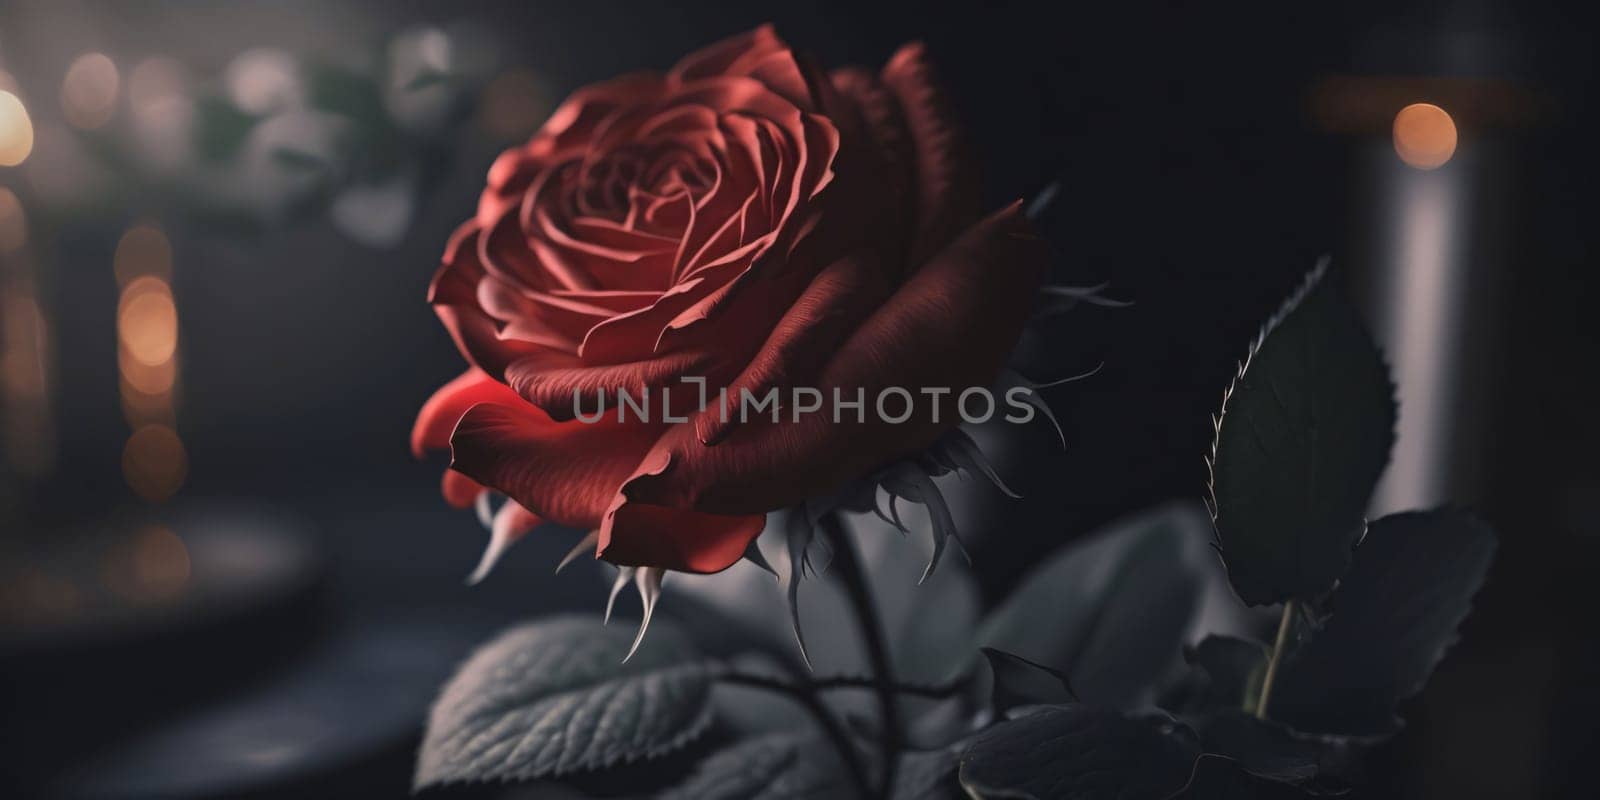 Banner: Beautiful red rose in a vase on a dark background.